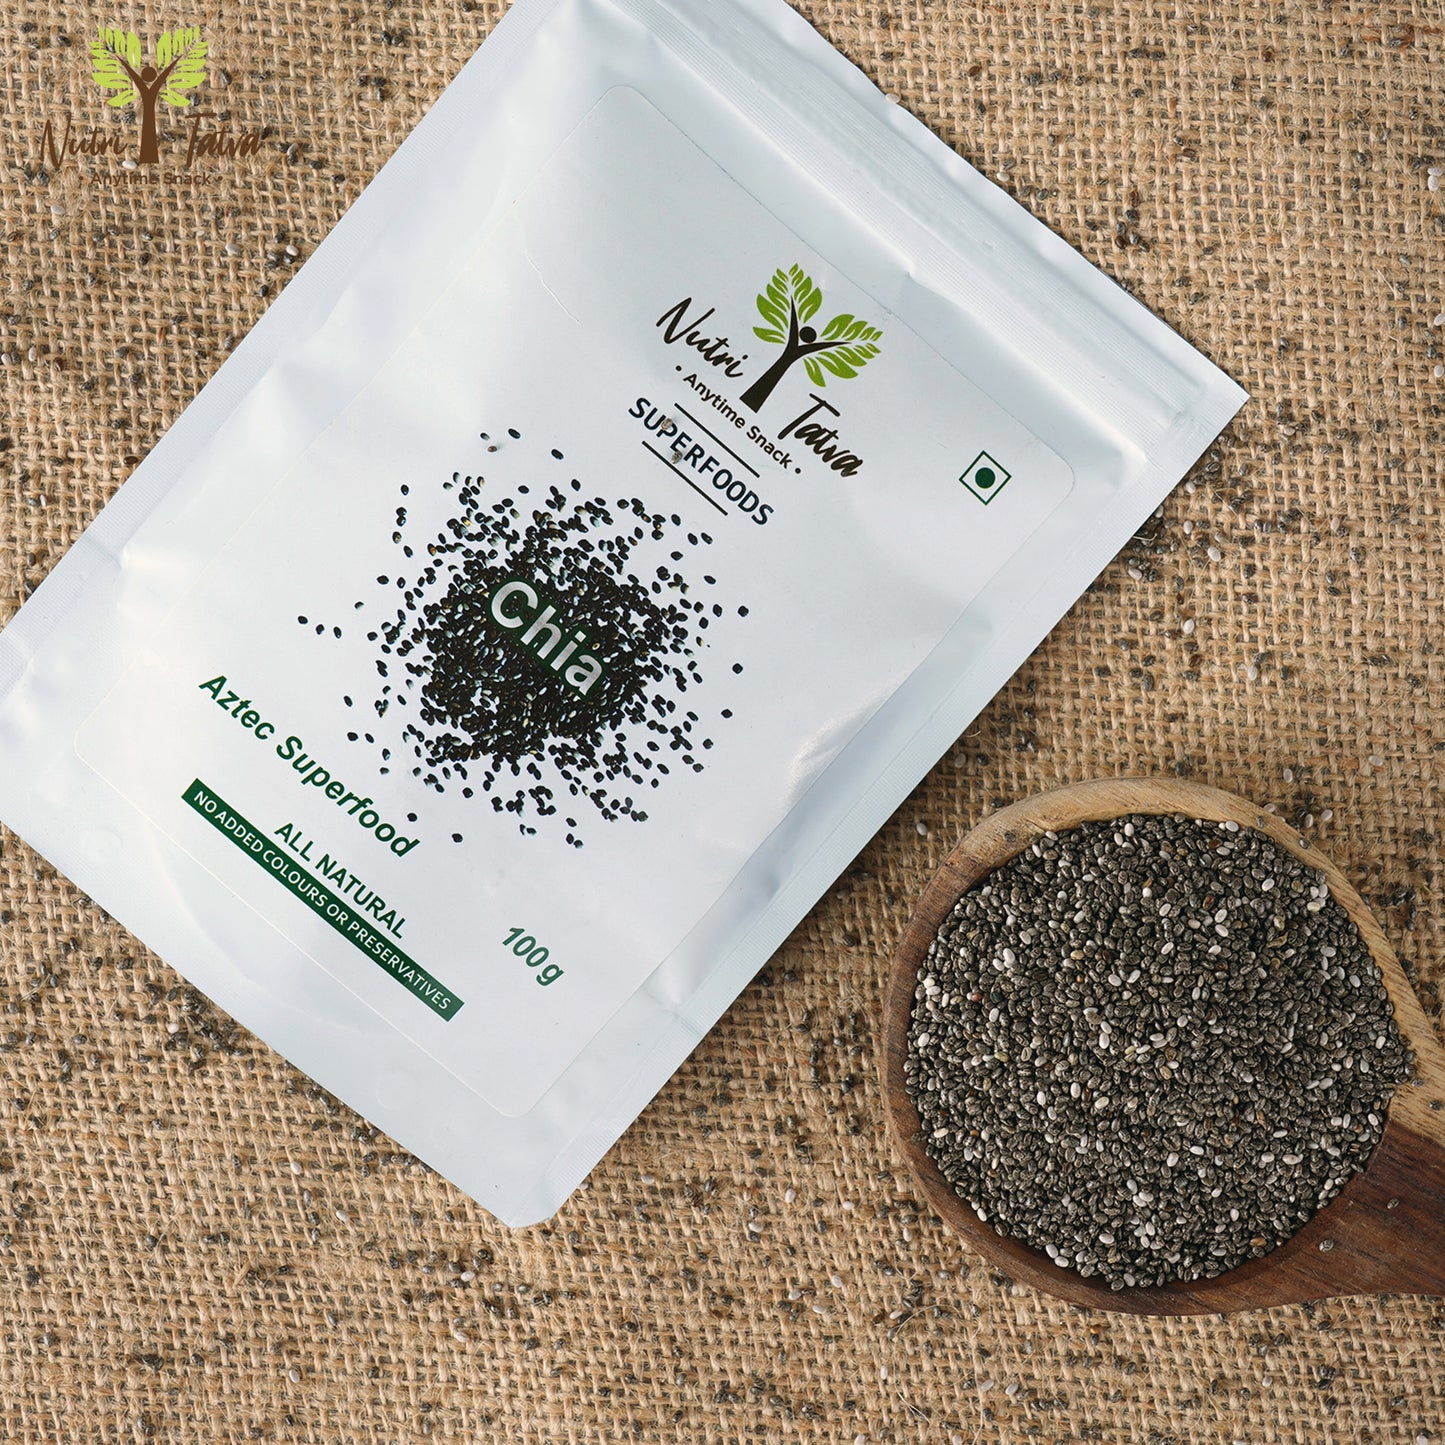 Premium Black Chia Seeds, 100 g - Rich in Omega 3 and Fibre - For weight-loss